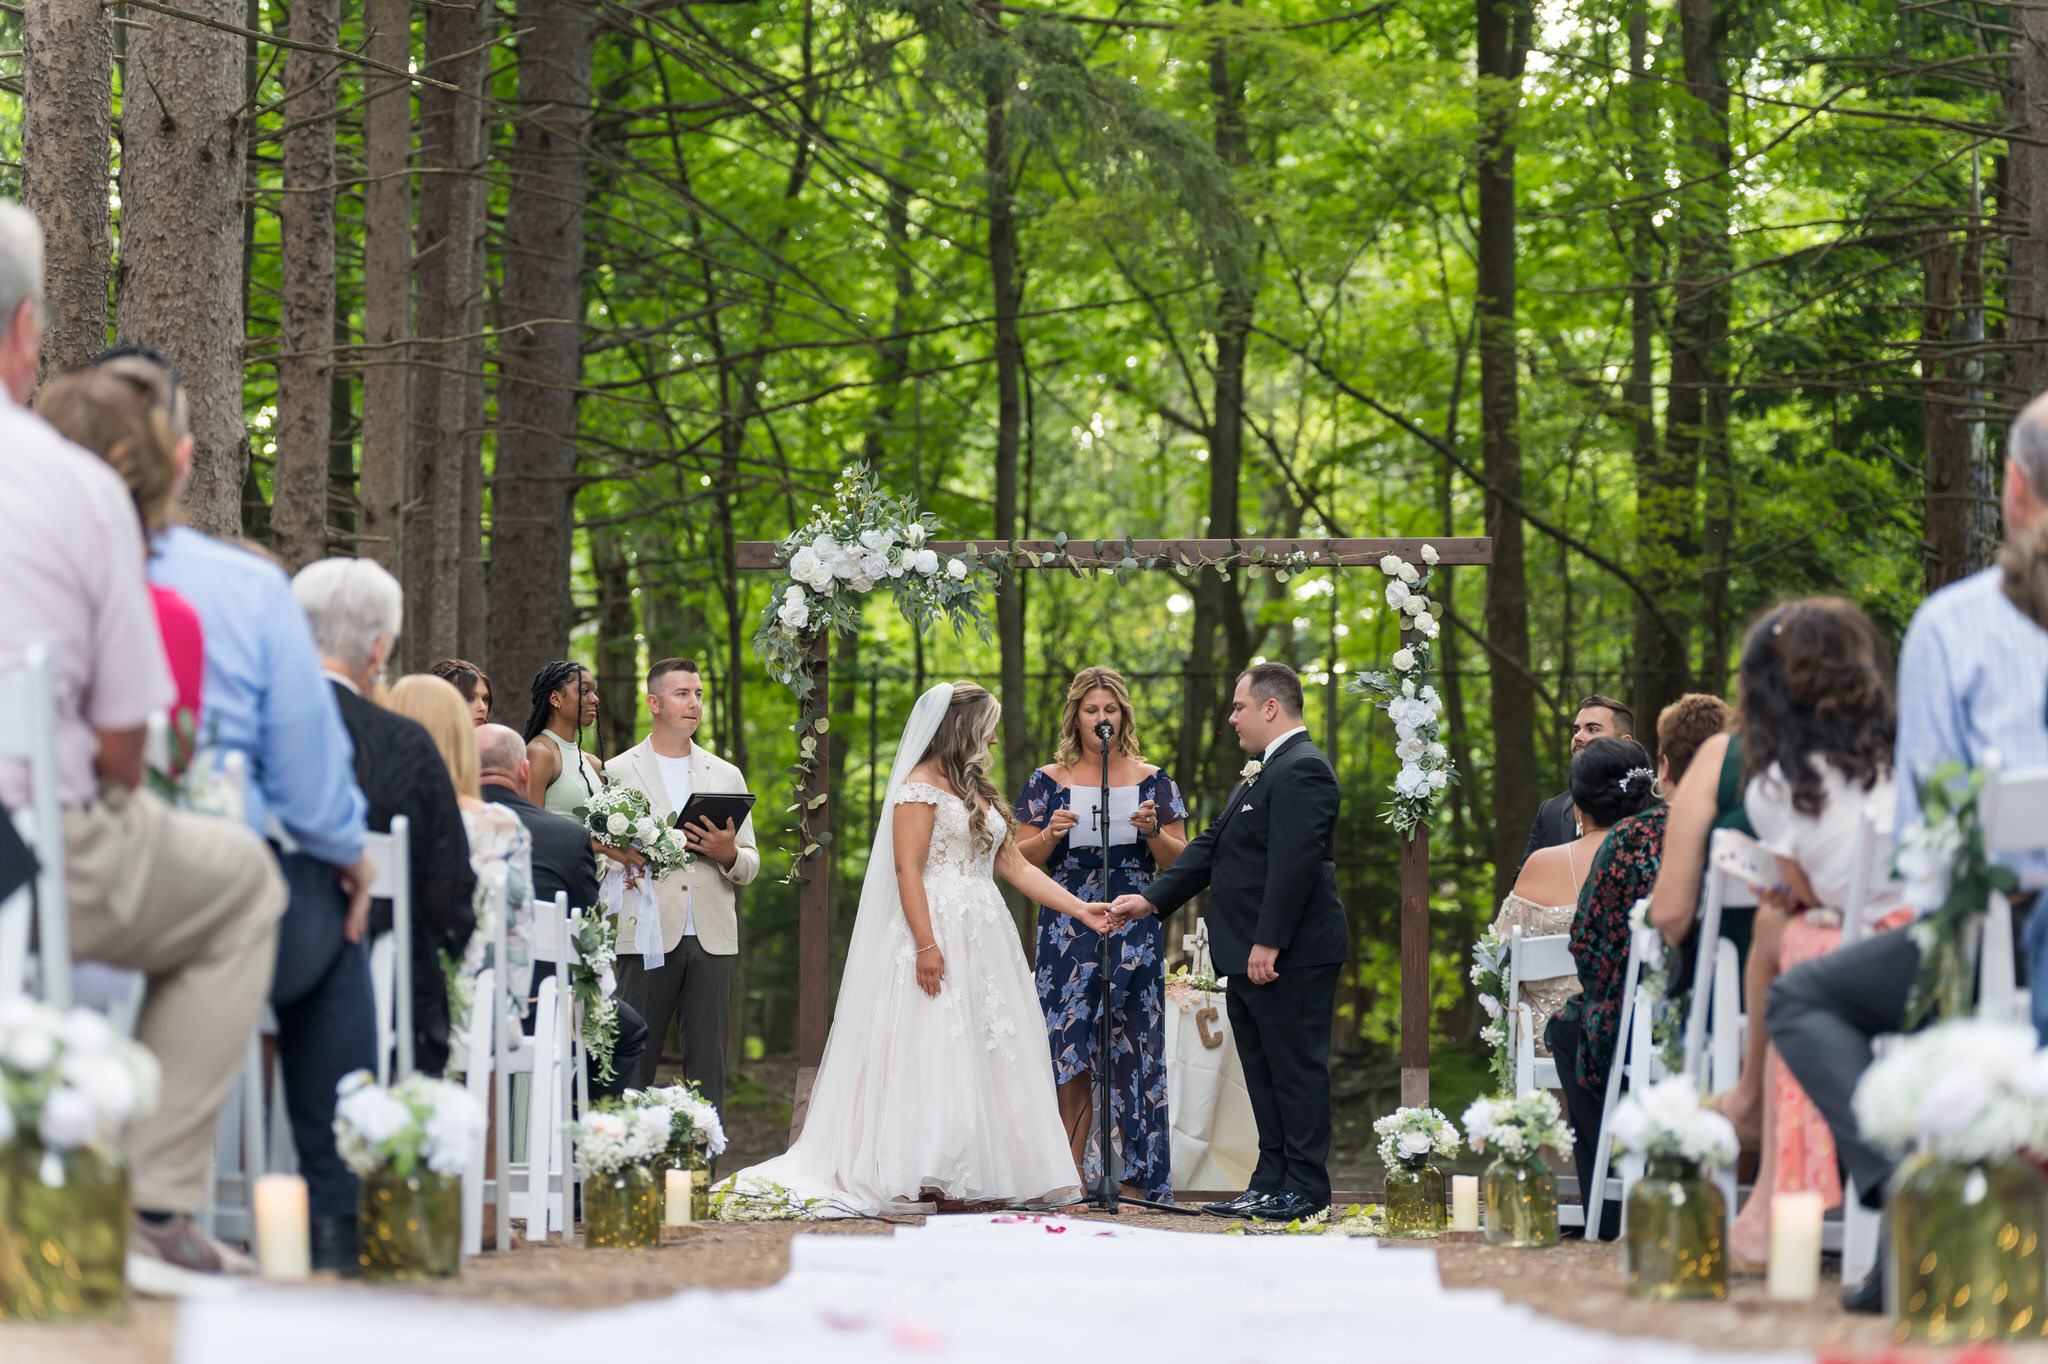 A Stony Creek wedding ceremony in the Pines.   